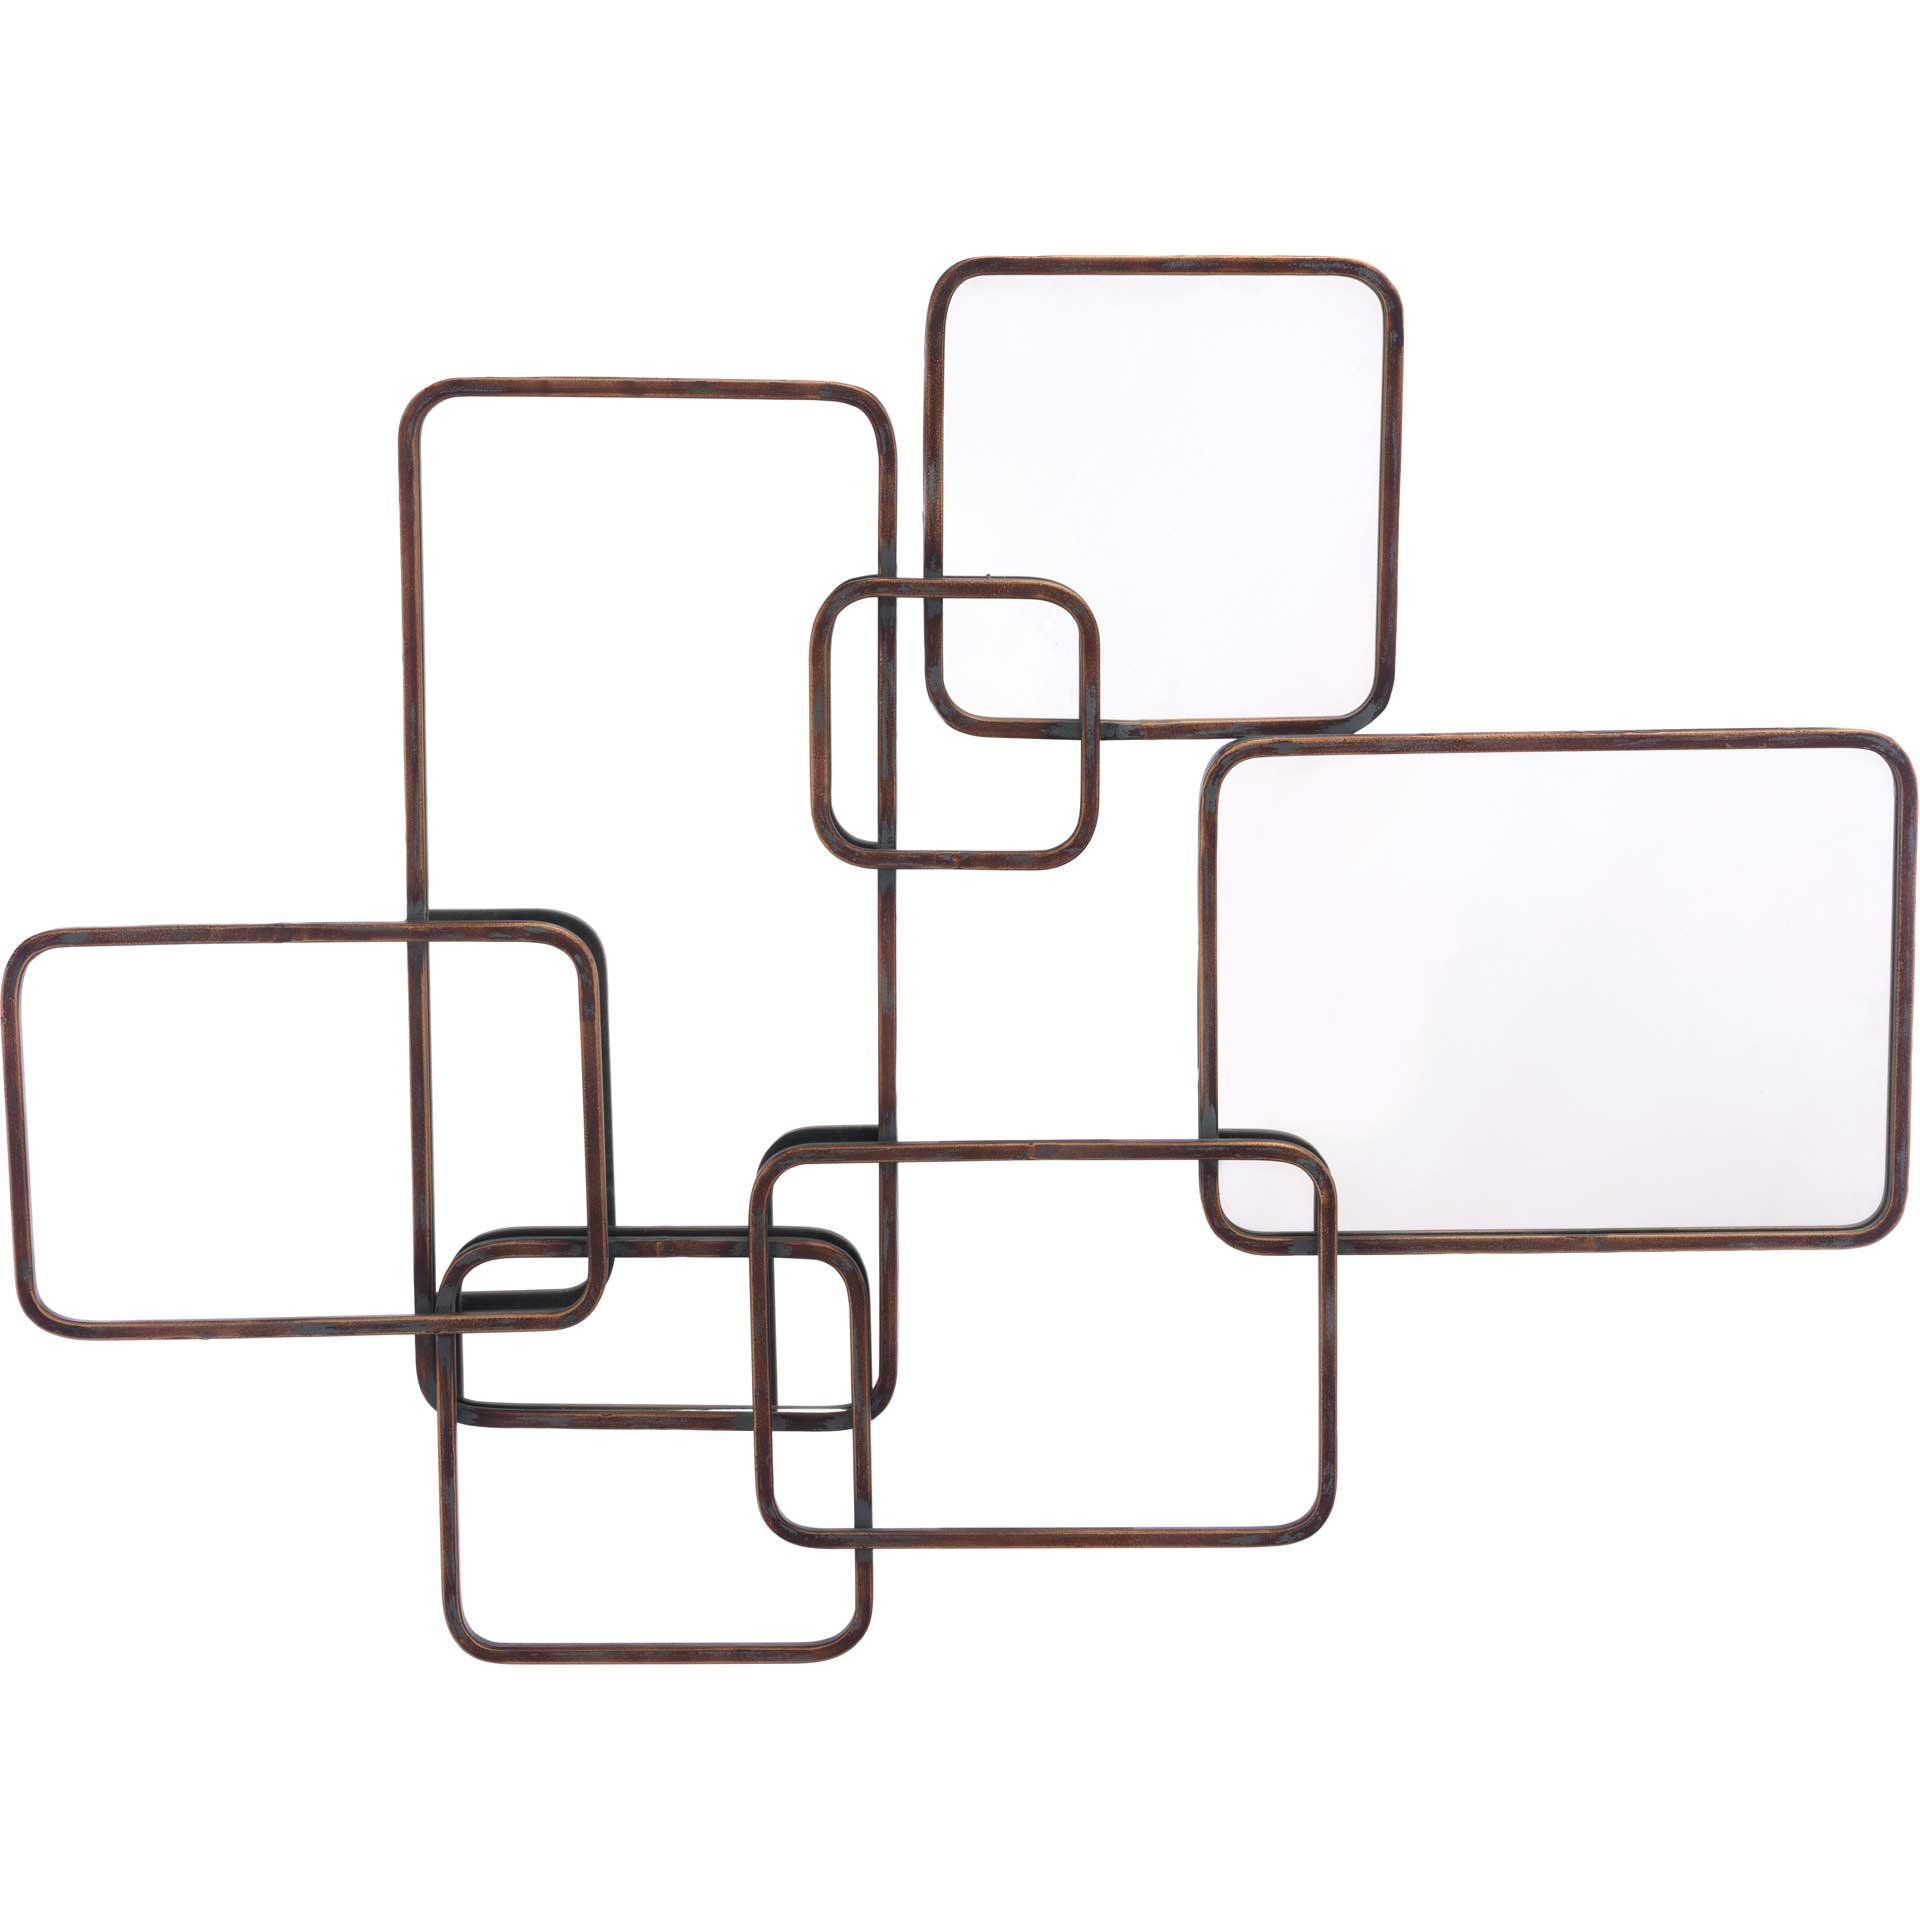 Overlapping Squares Antique Wall Decor